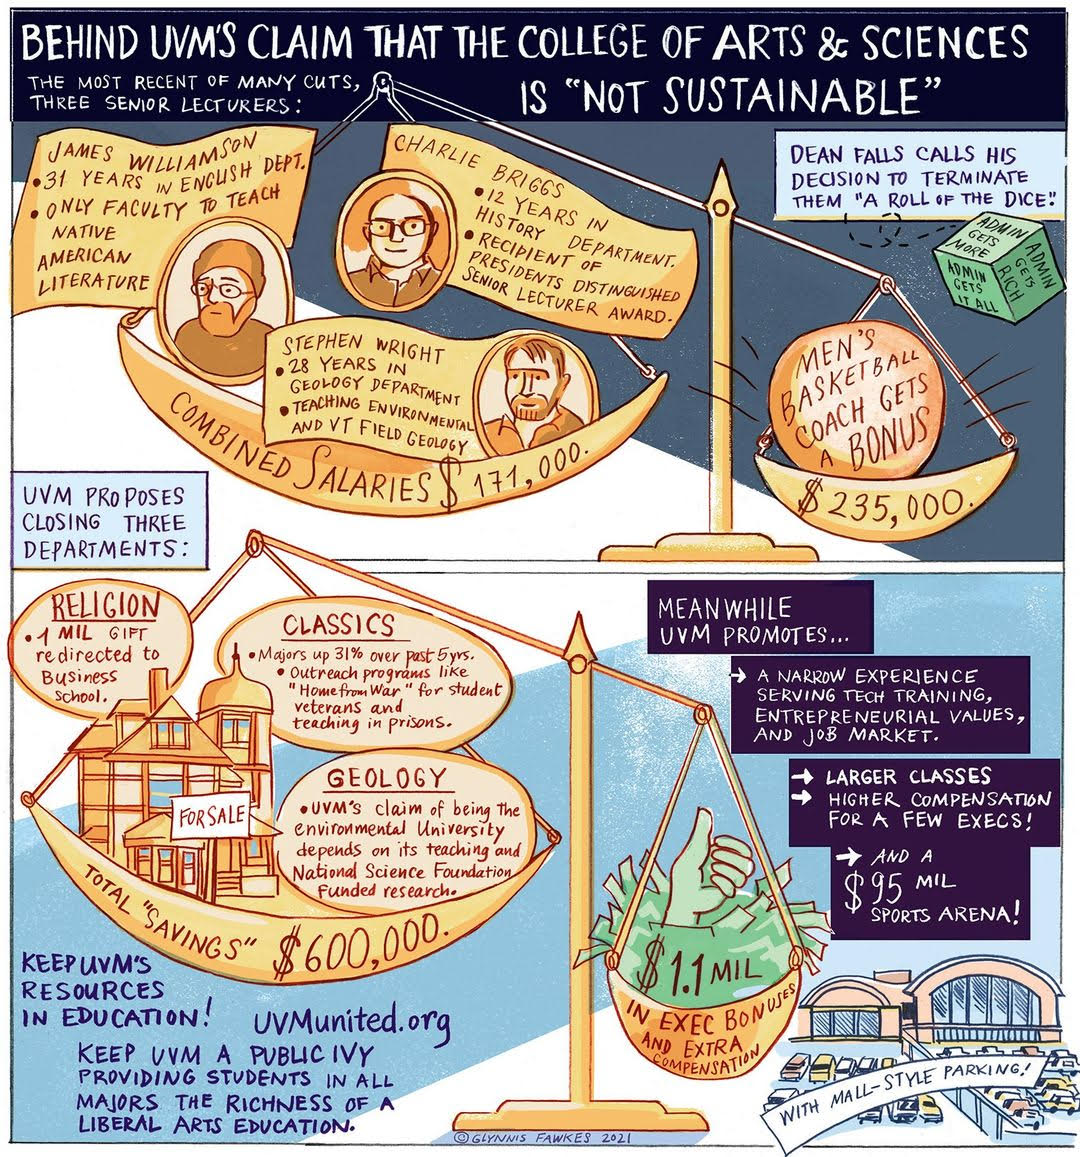 Illustrated infographic titled "Behind UVM's claim that the College of Arts & Sciences is 'not sustainable'"